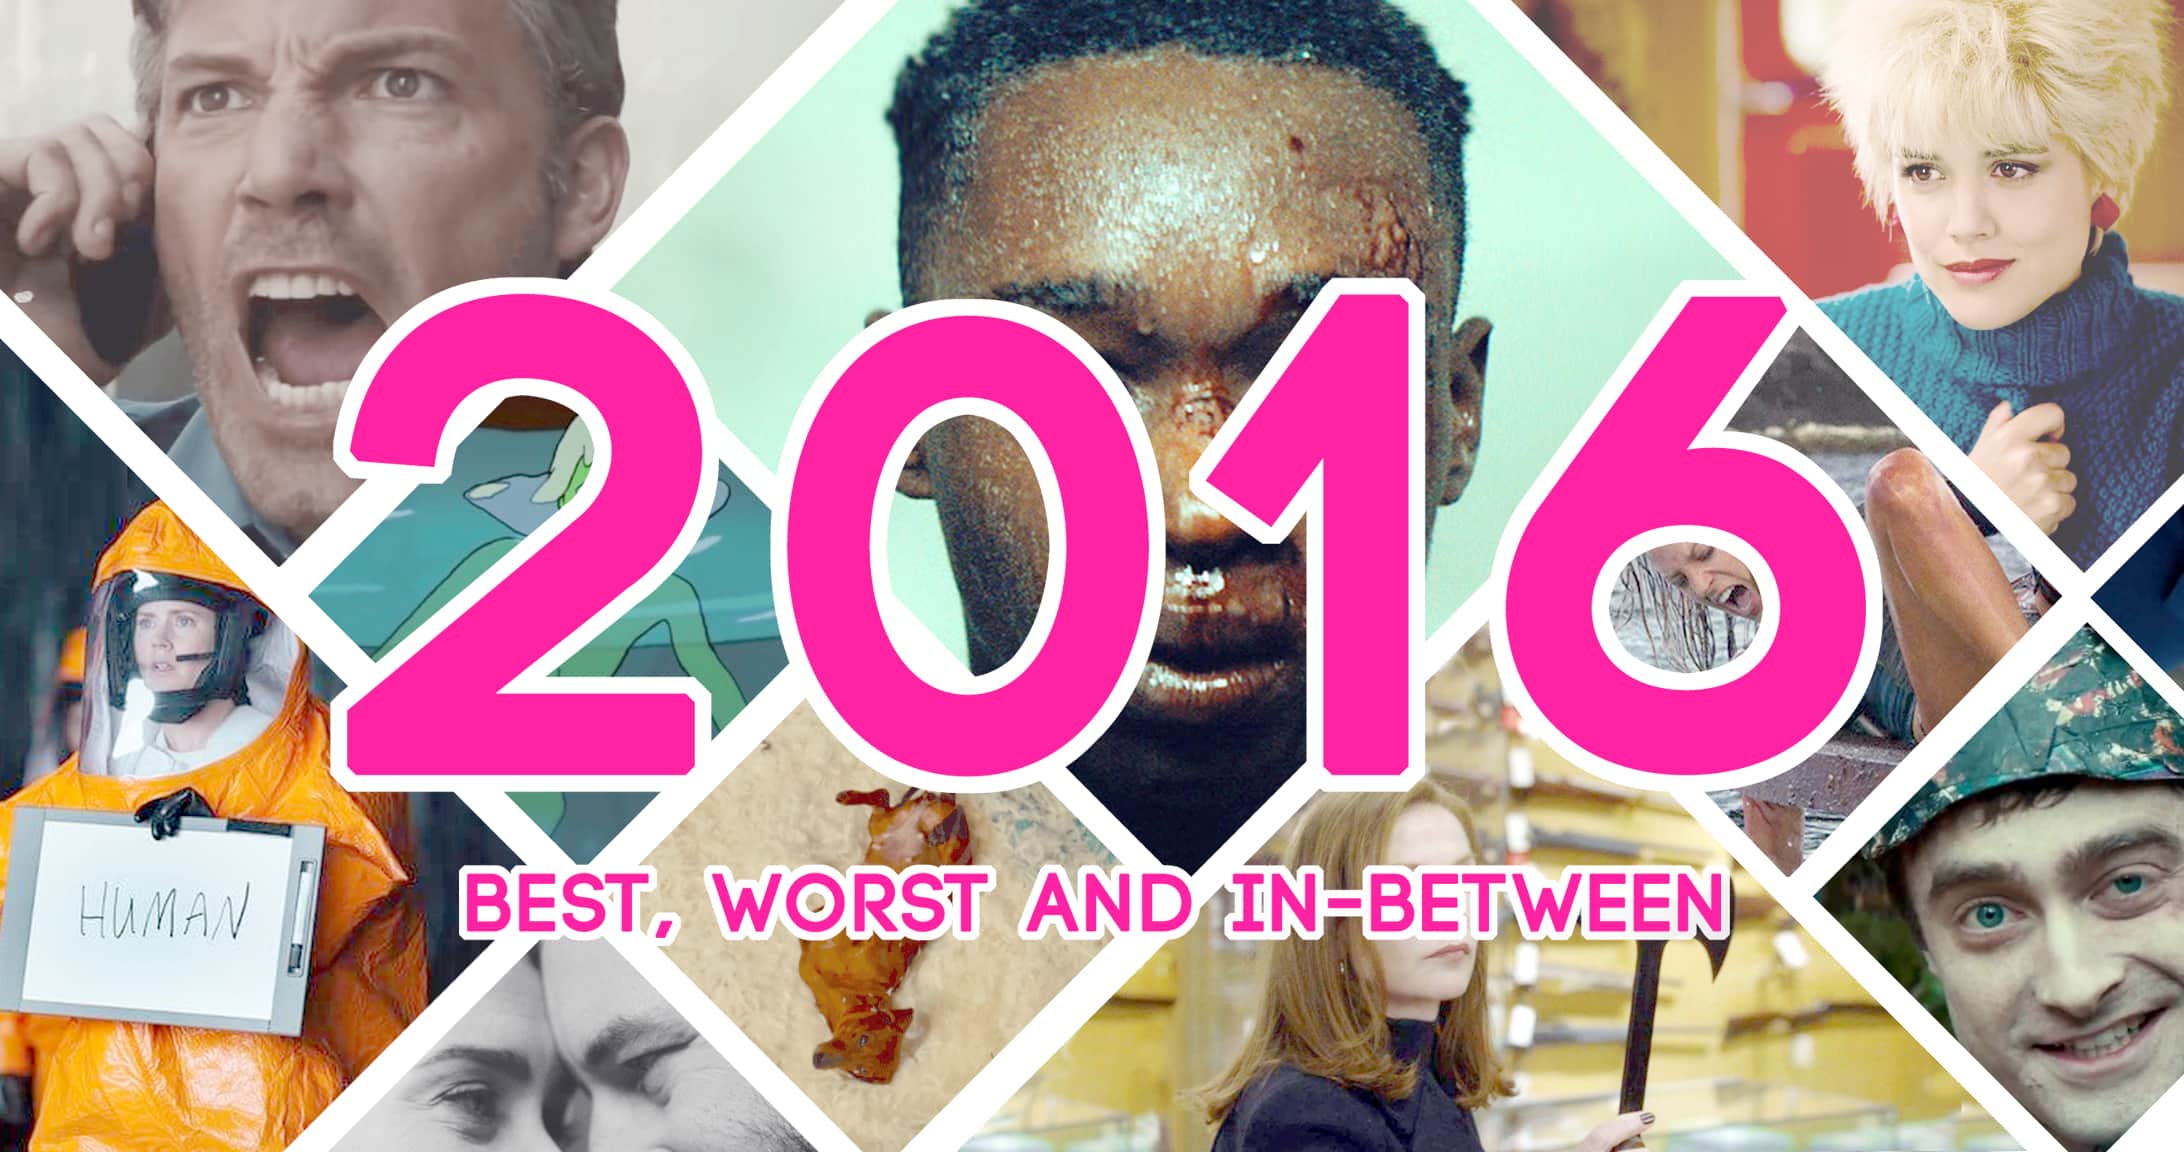 2016 the best and words and in between keenan marr tamblyn